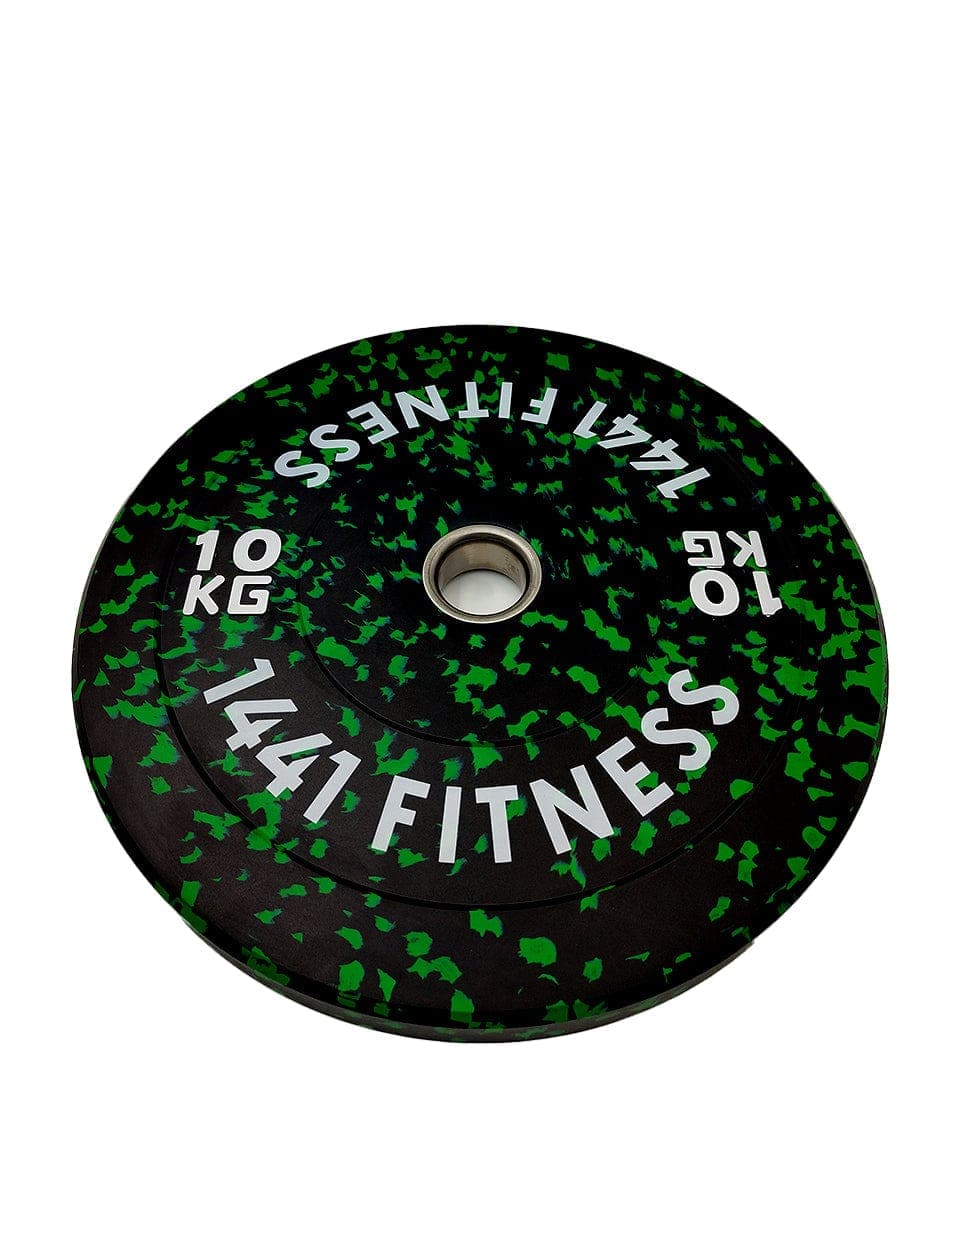 PRSAE 1441 Fitness Colored Camouflage Bumper Plates - 5 Kg to 25 Kg